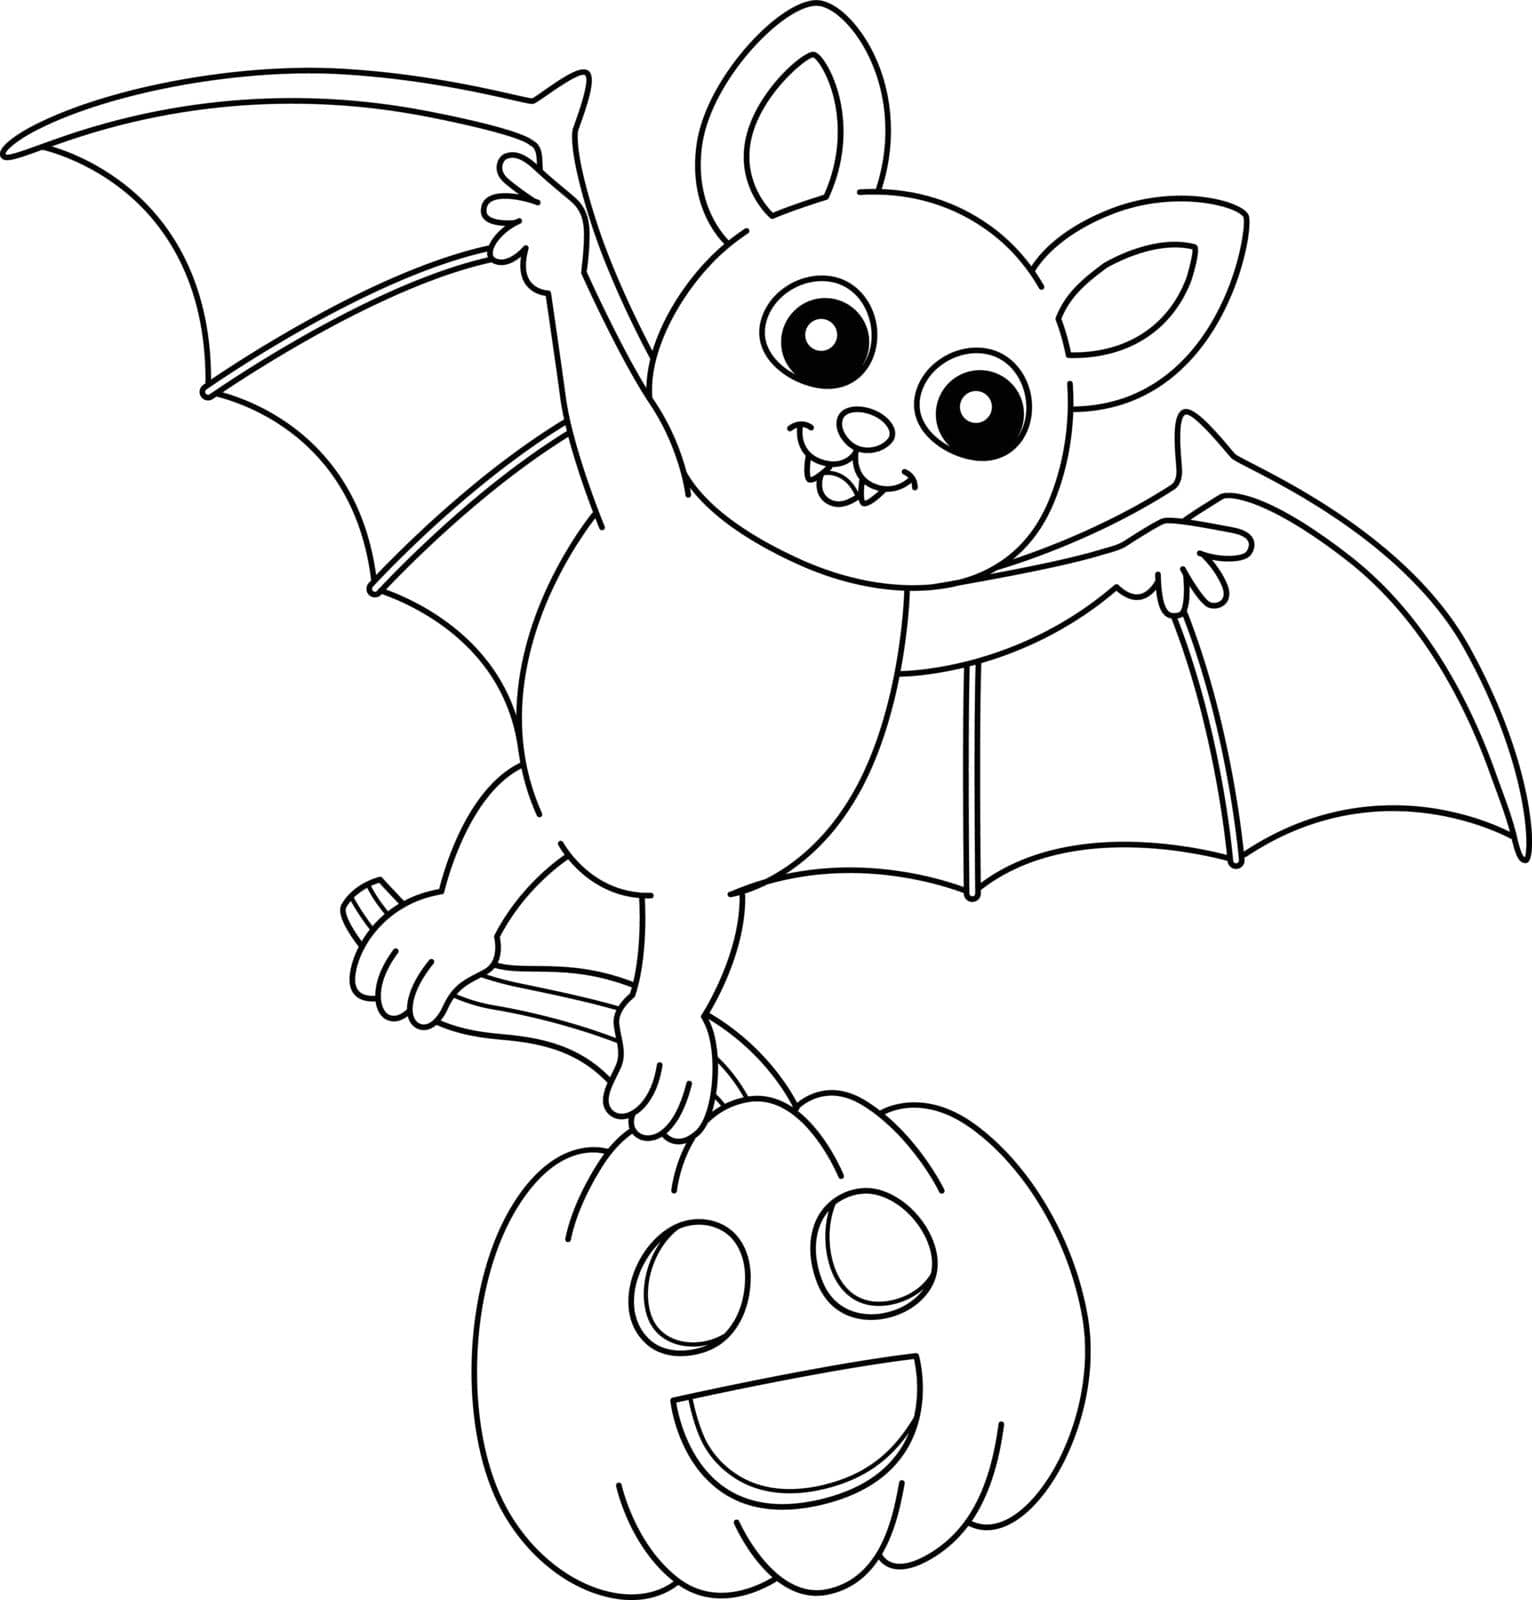 A cute and funny coloring page of a flying bat on halloween. Provides hours of coloring fun for children. To color, this page is very easy. Suitable for little kids and toddlers.